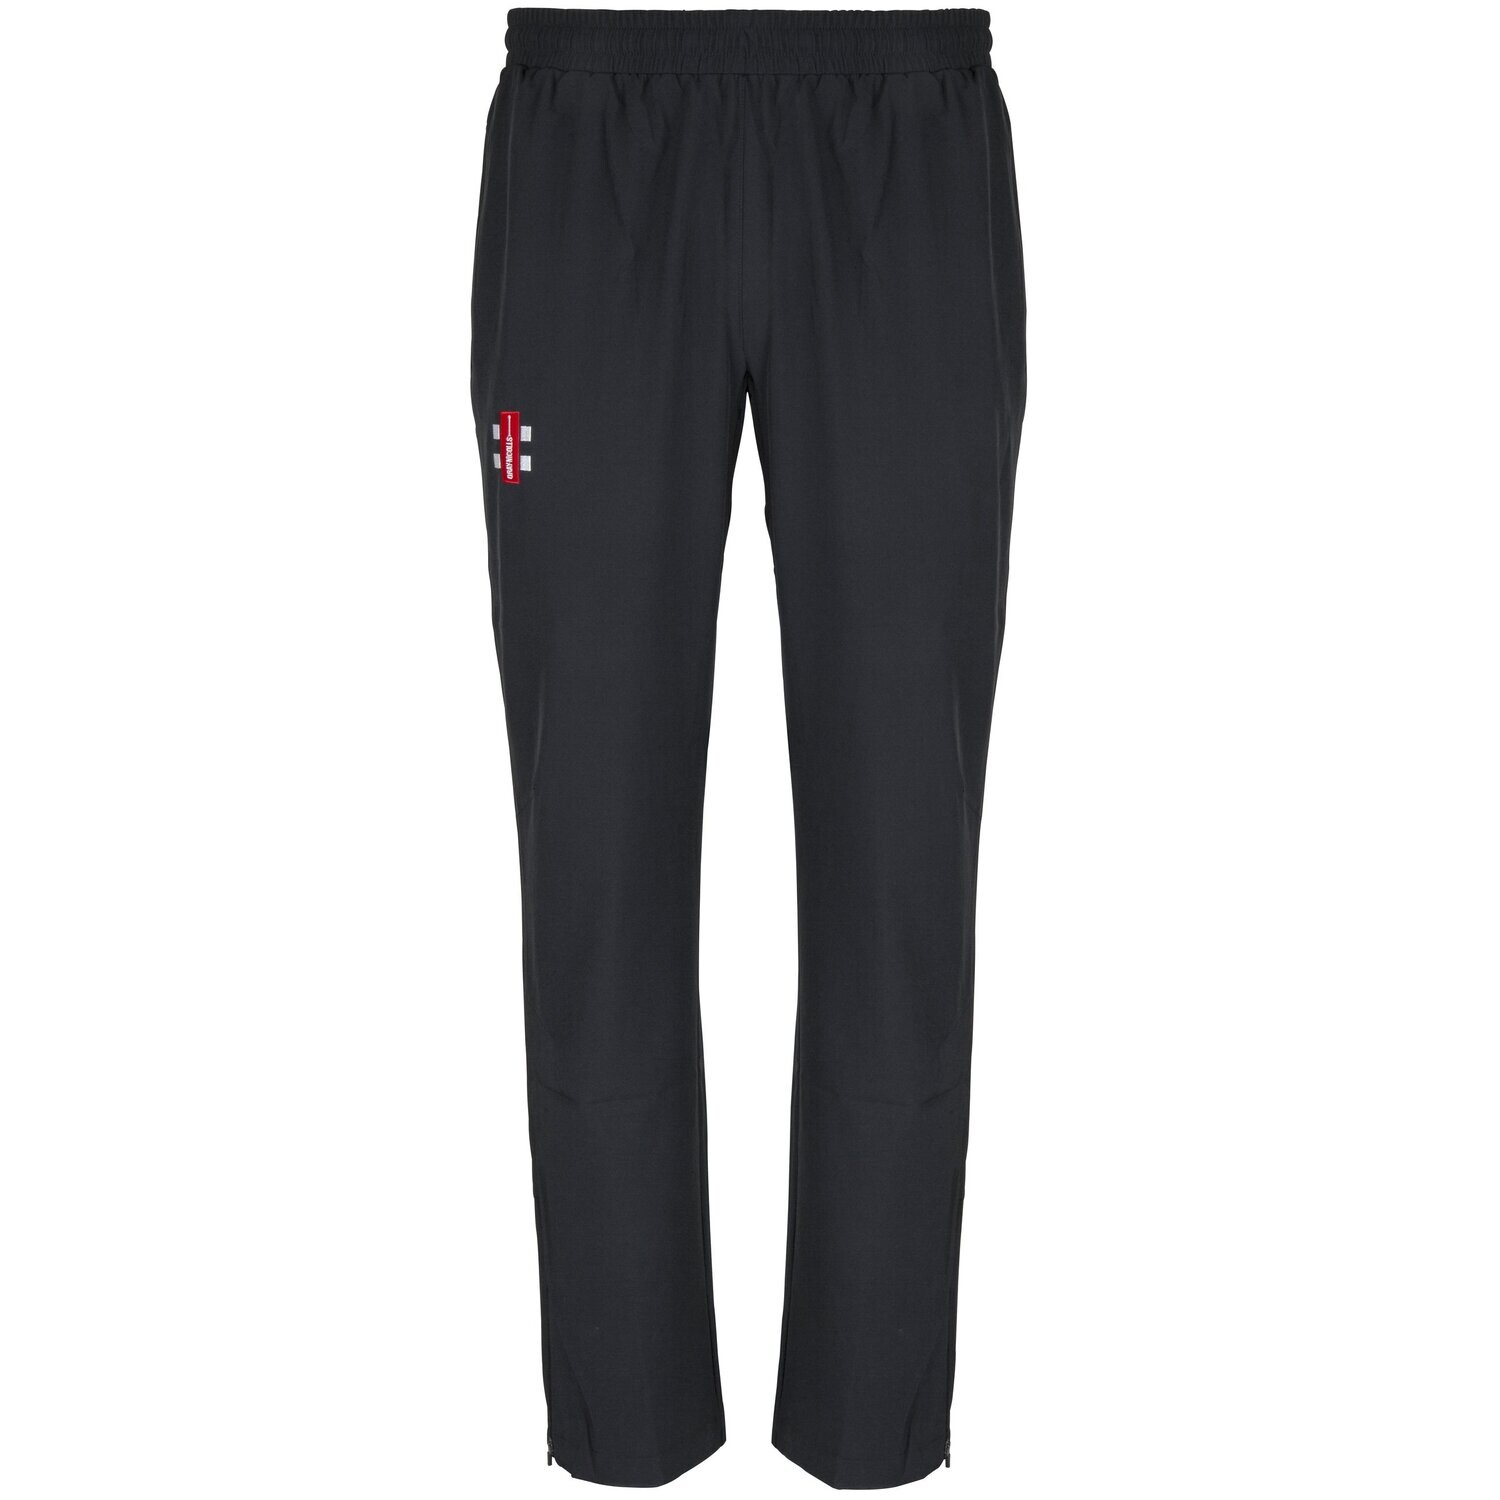 Seaham Harbour Velocity Training Trousers